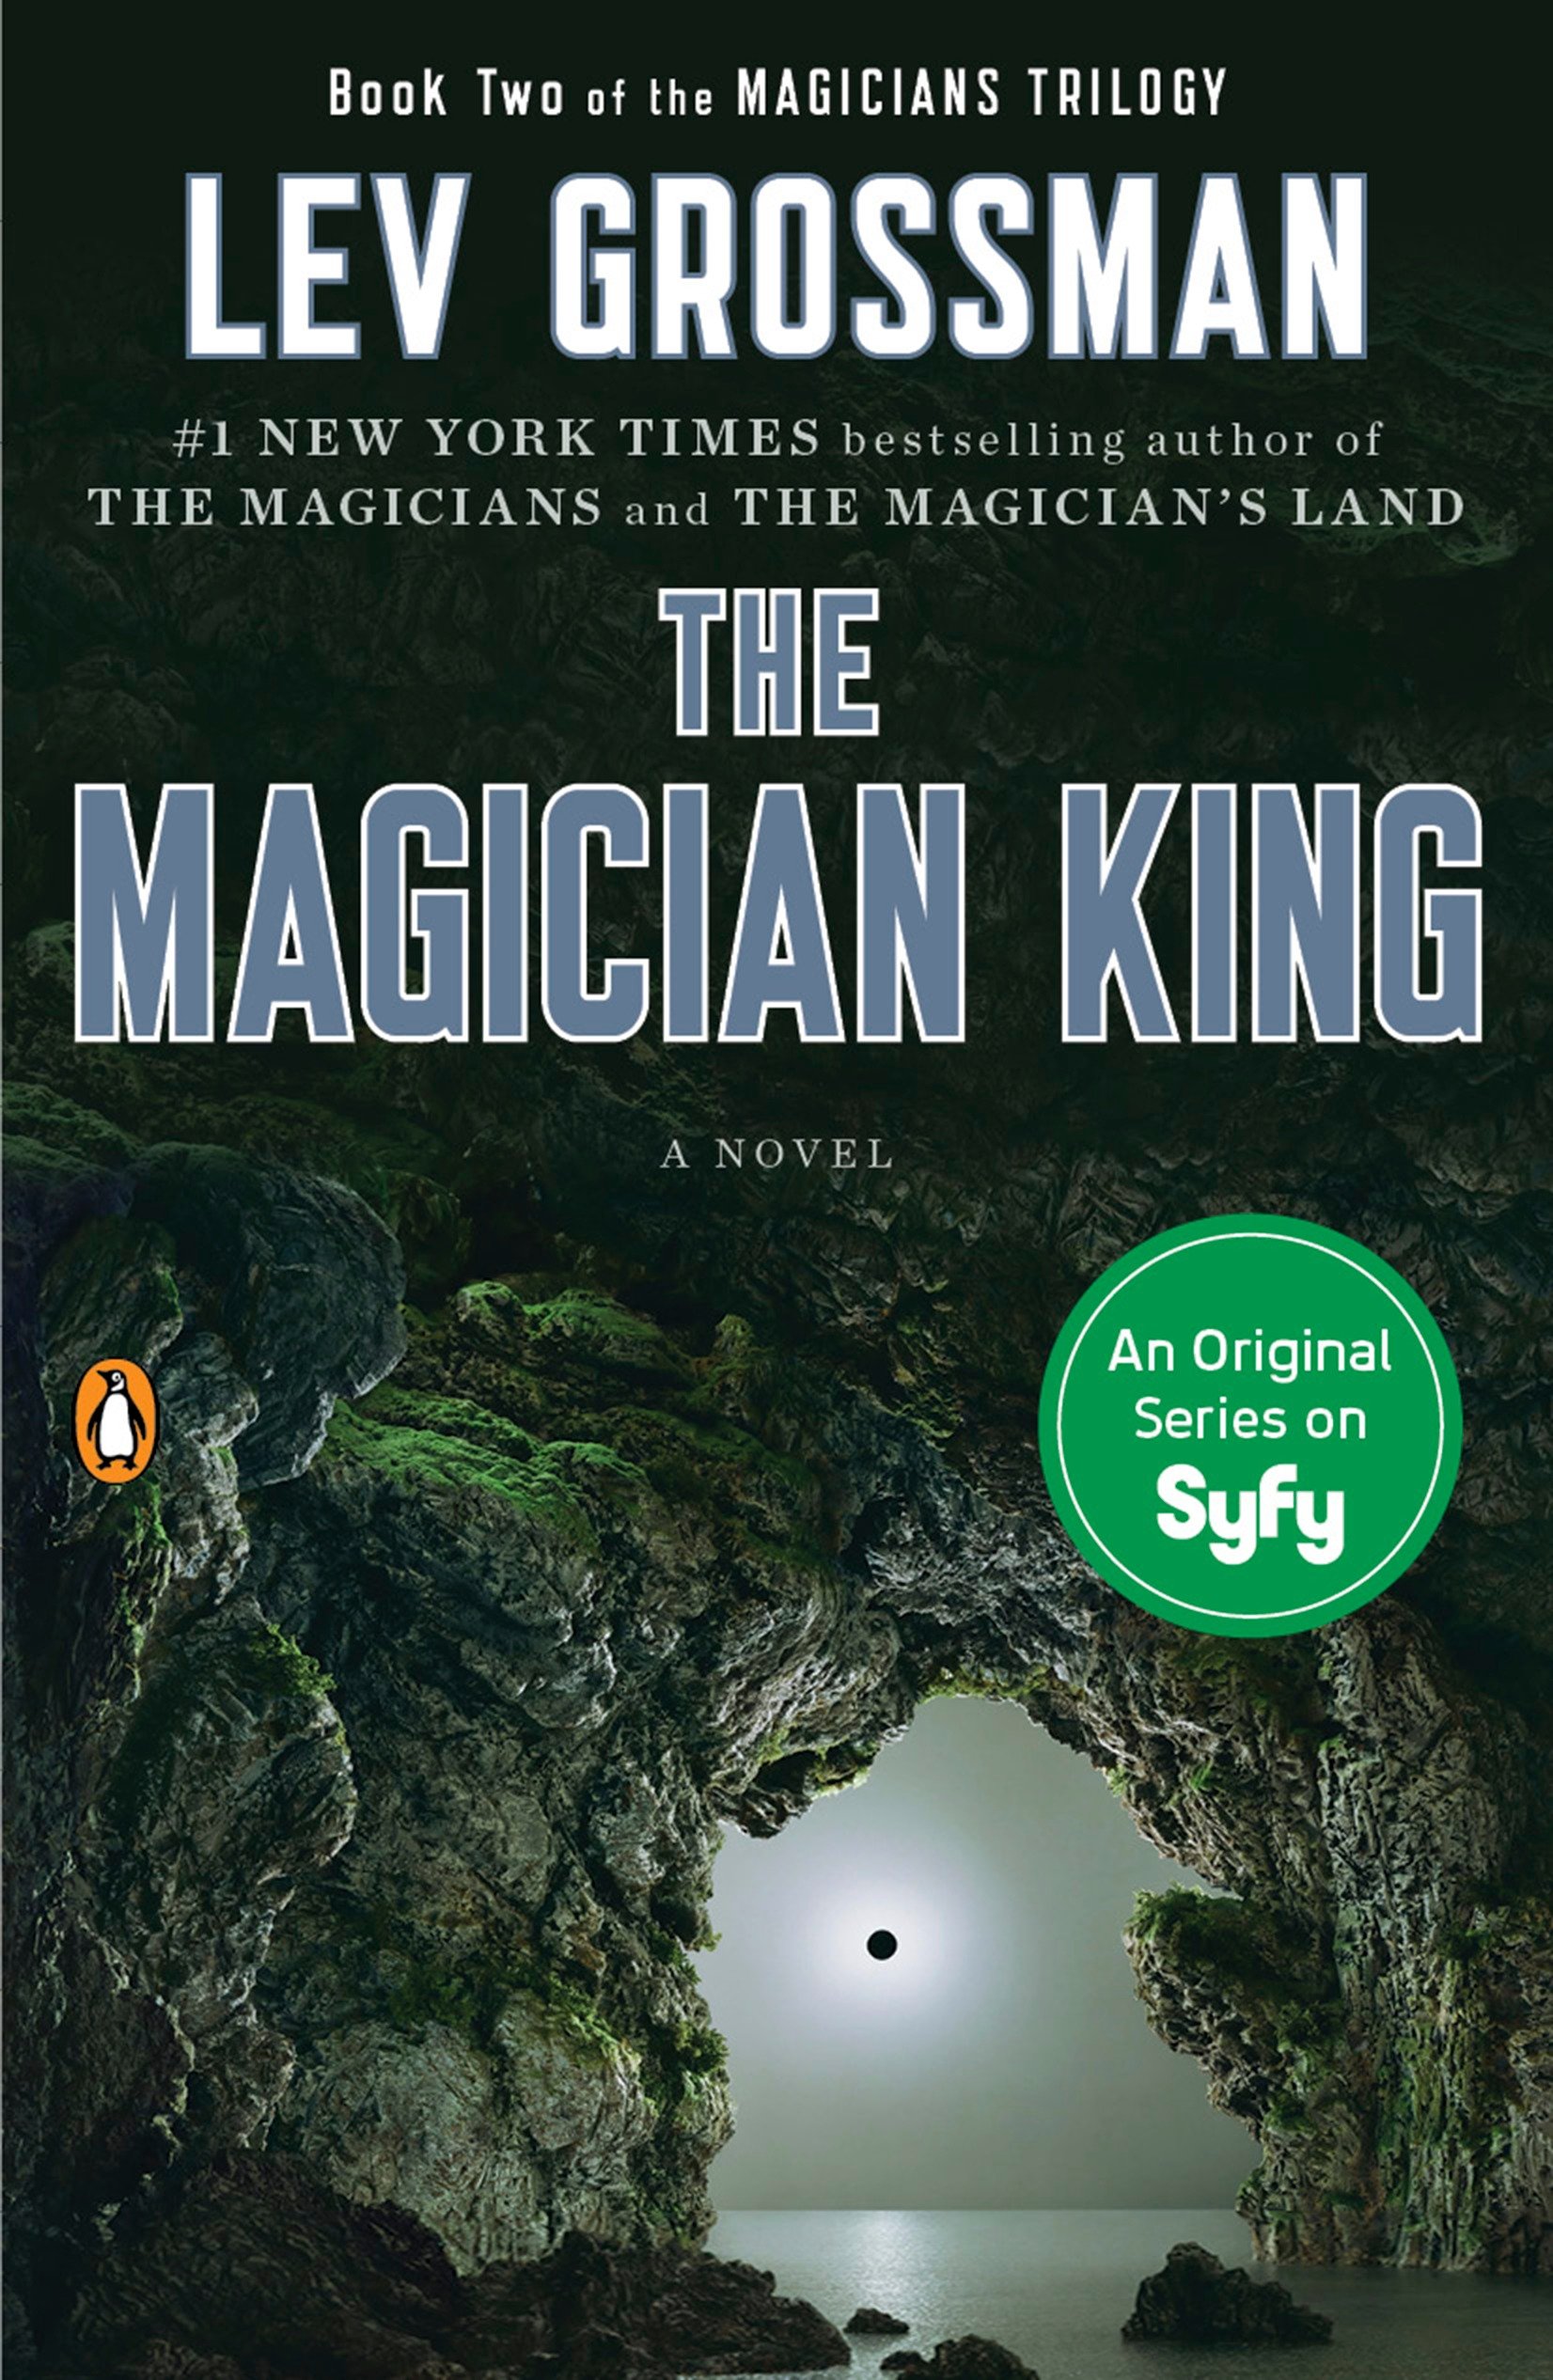 Magicians Trilogy: The Magician King : A Novel (Series #2) (Paperback) - image 1 of 3